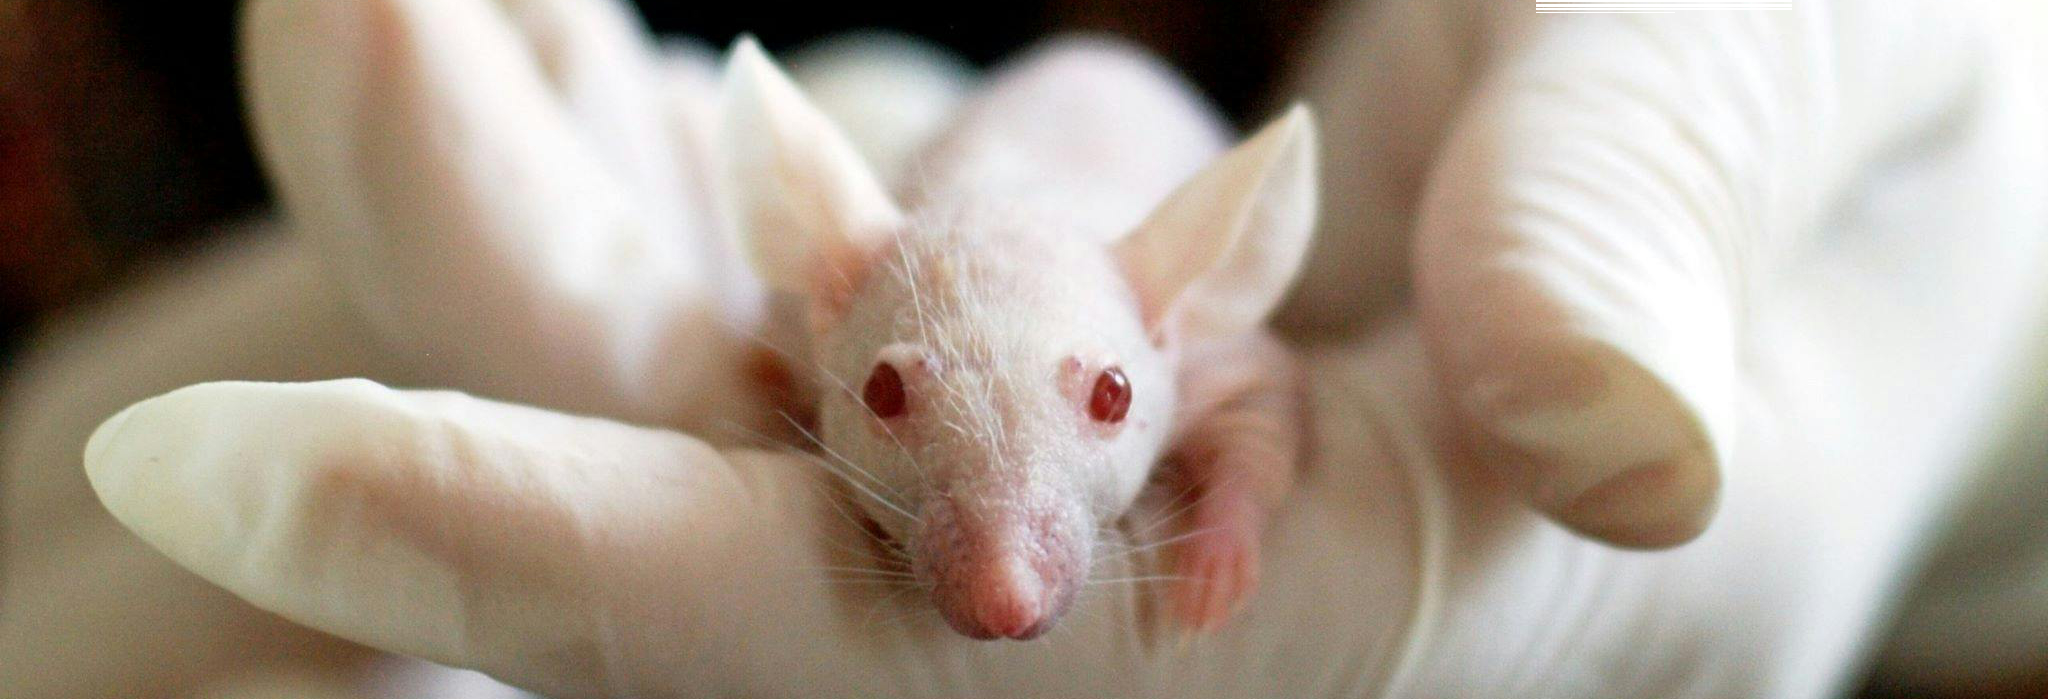 Nude mouse in gloved hand